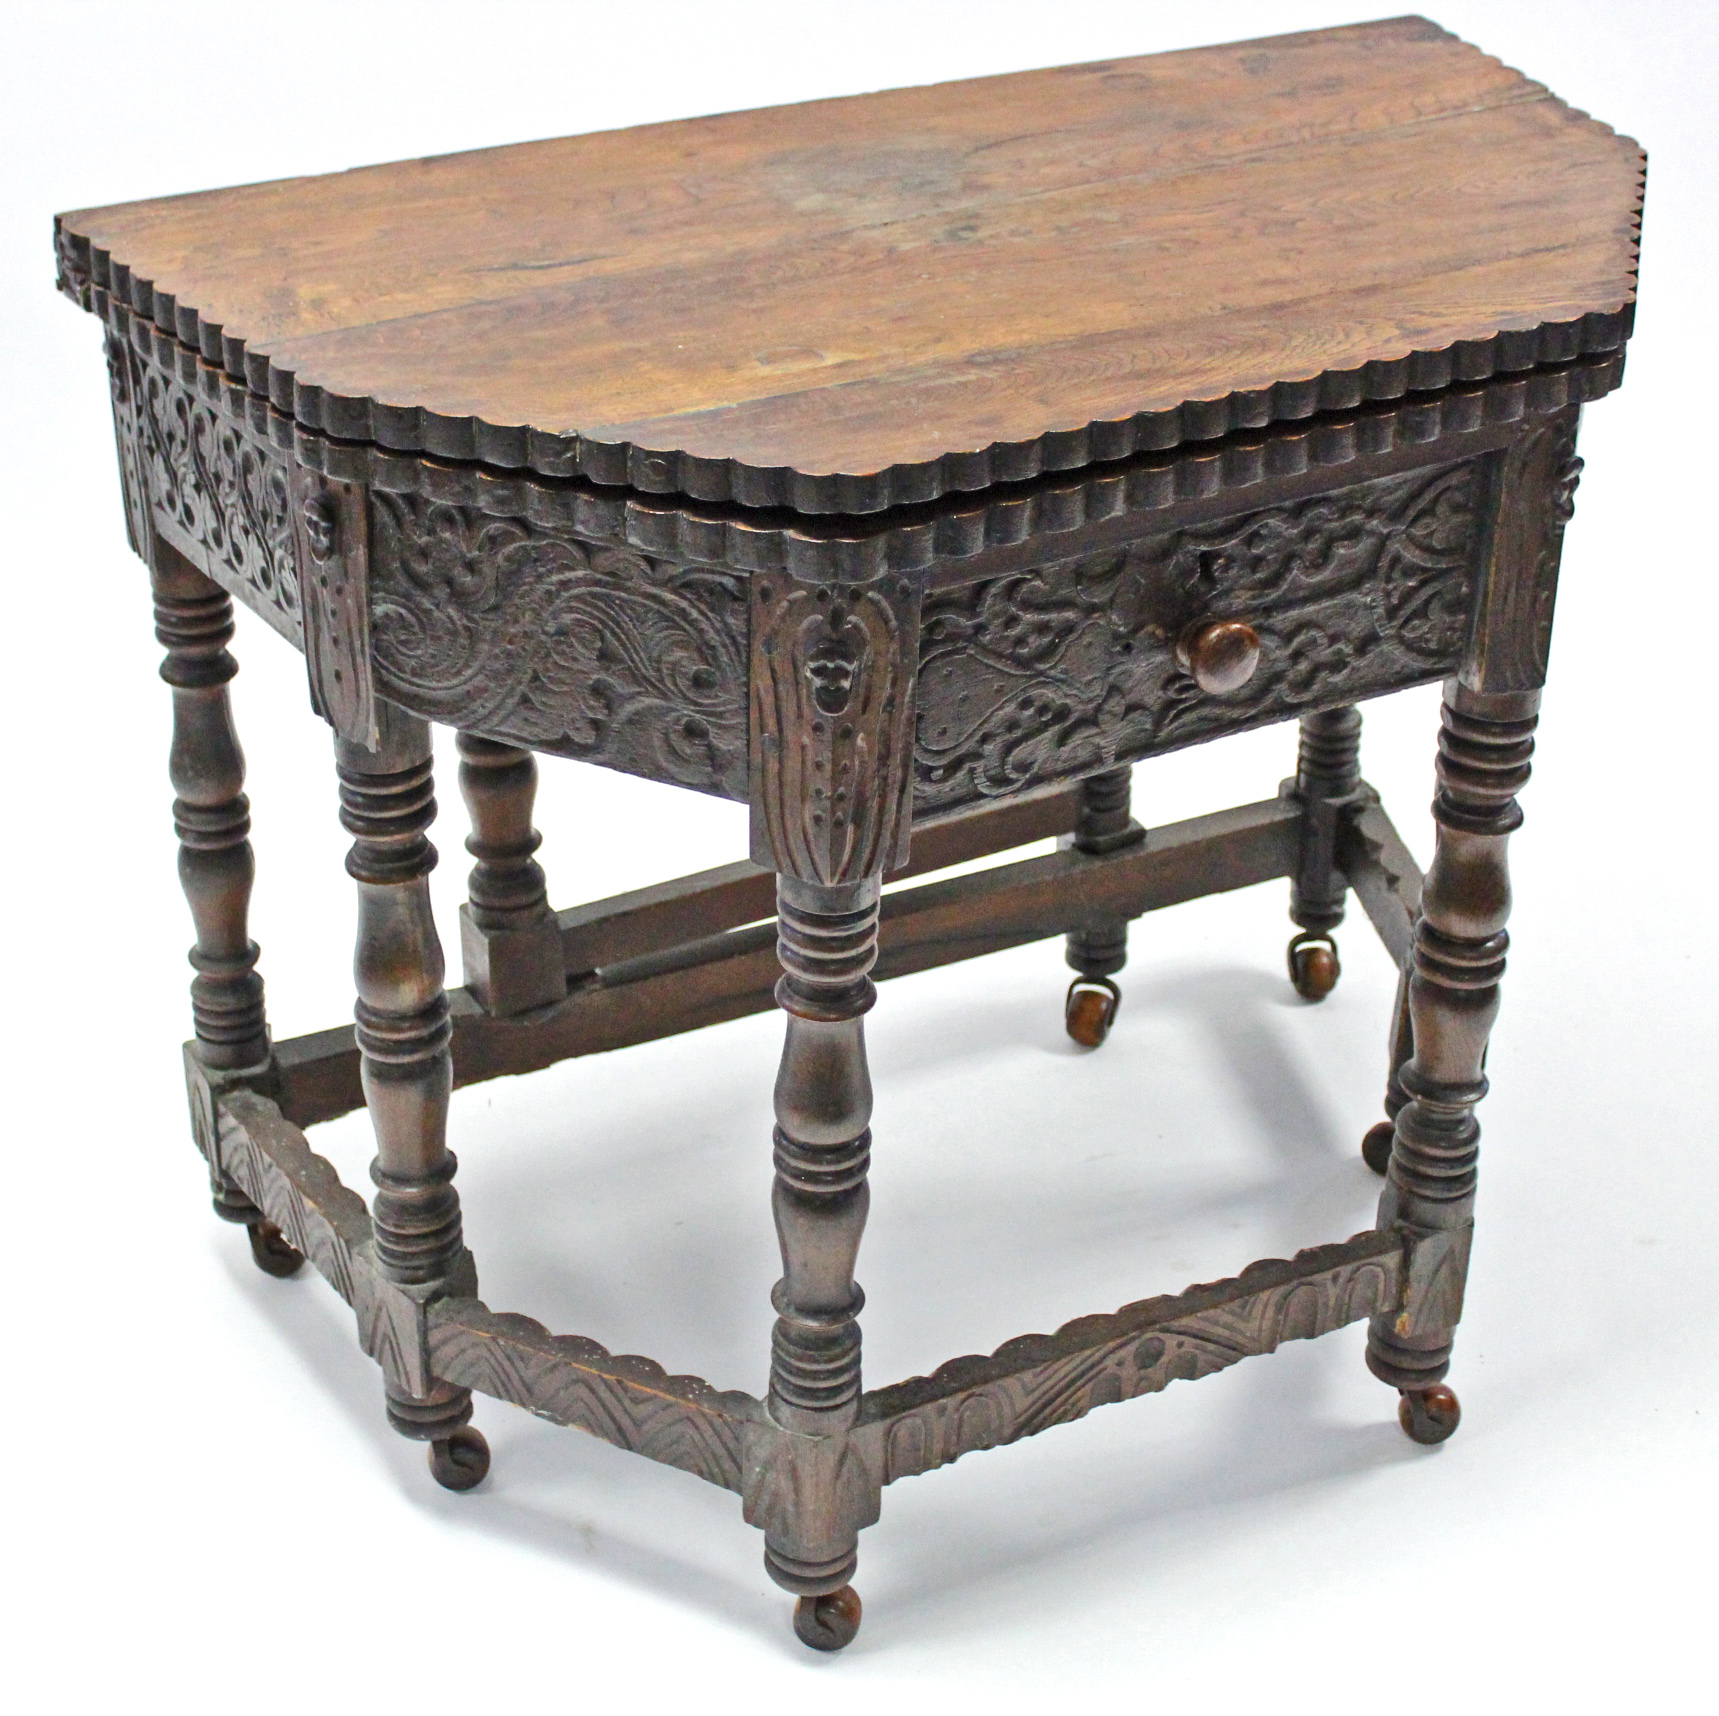 A 17th century-style carved oak credence table with fold-over top, shaped edge, fitted frieze